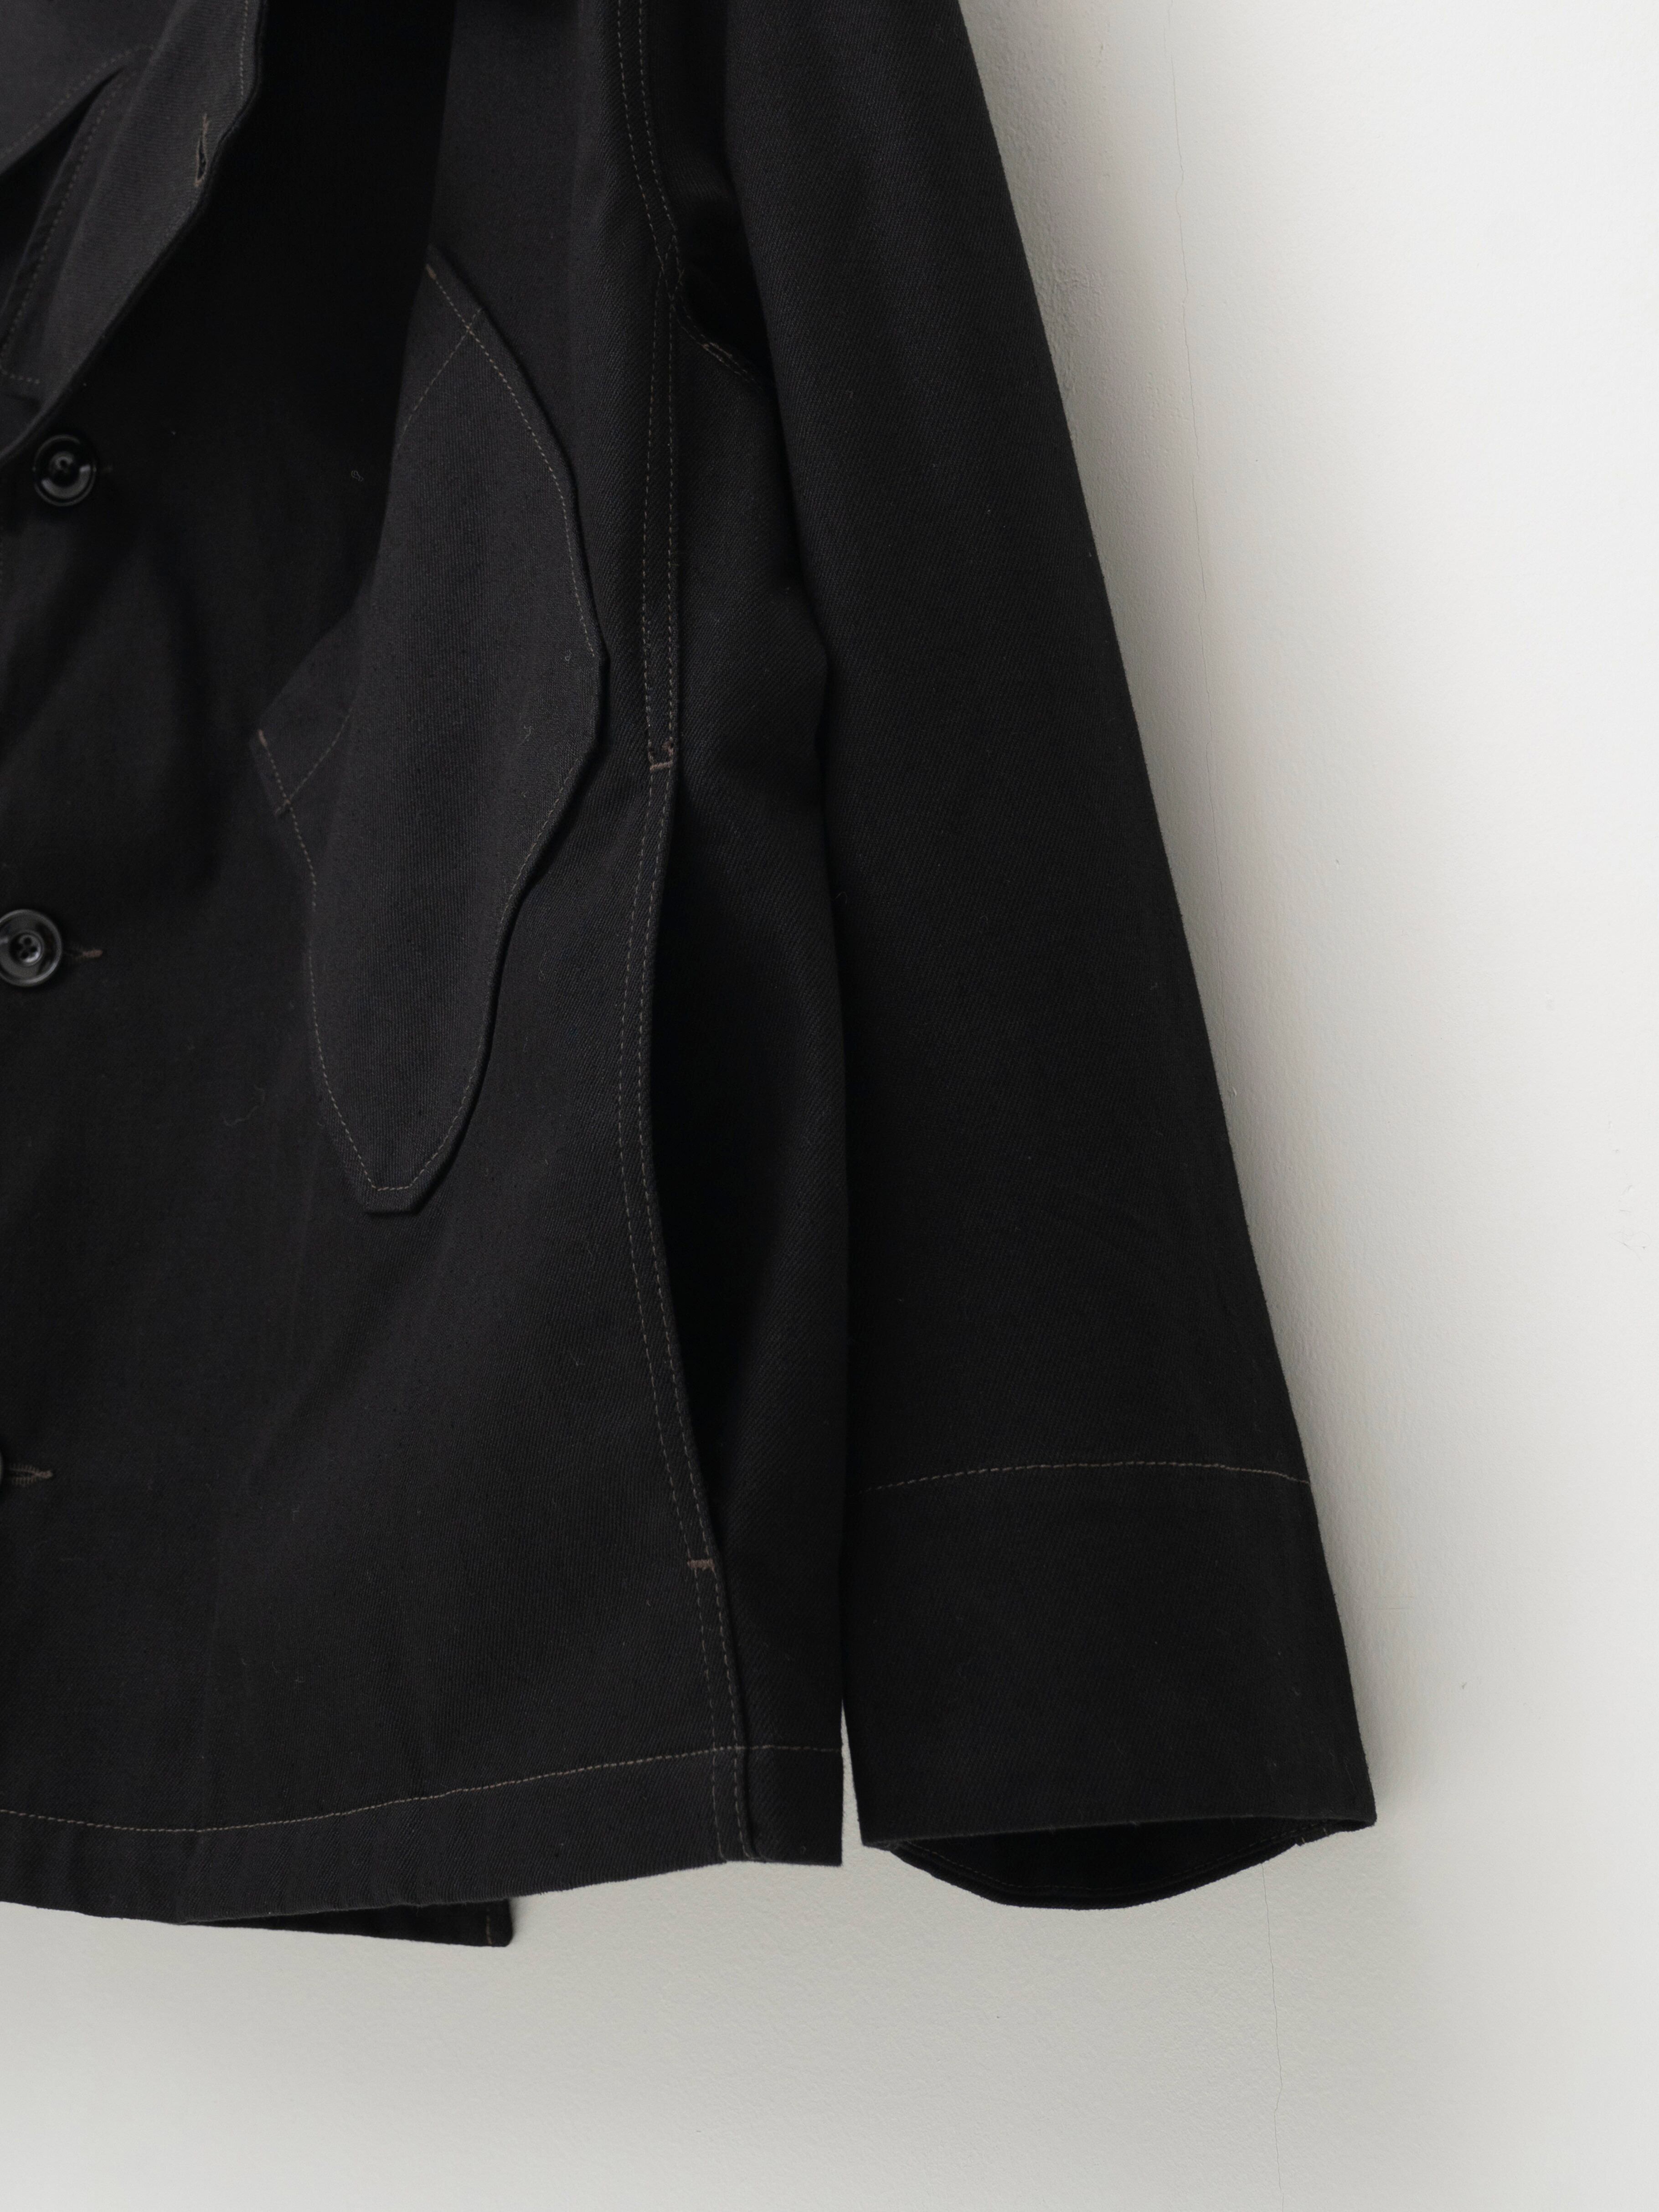 LEMAIRE DISPATCH JACKET BLACK OW334 LD1000 | BEST PACKING STORE